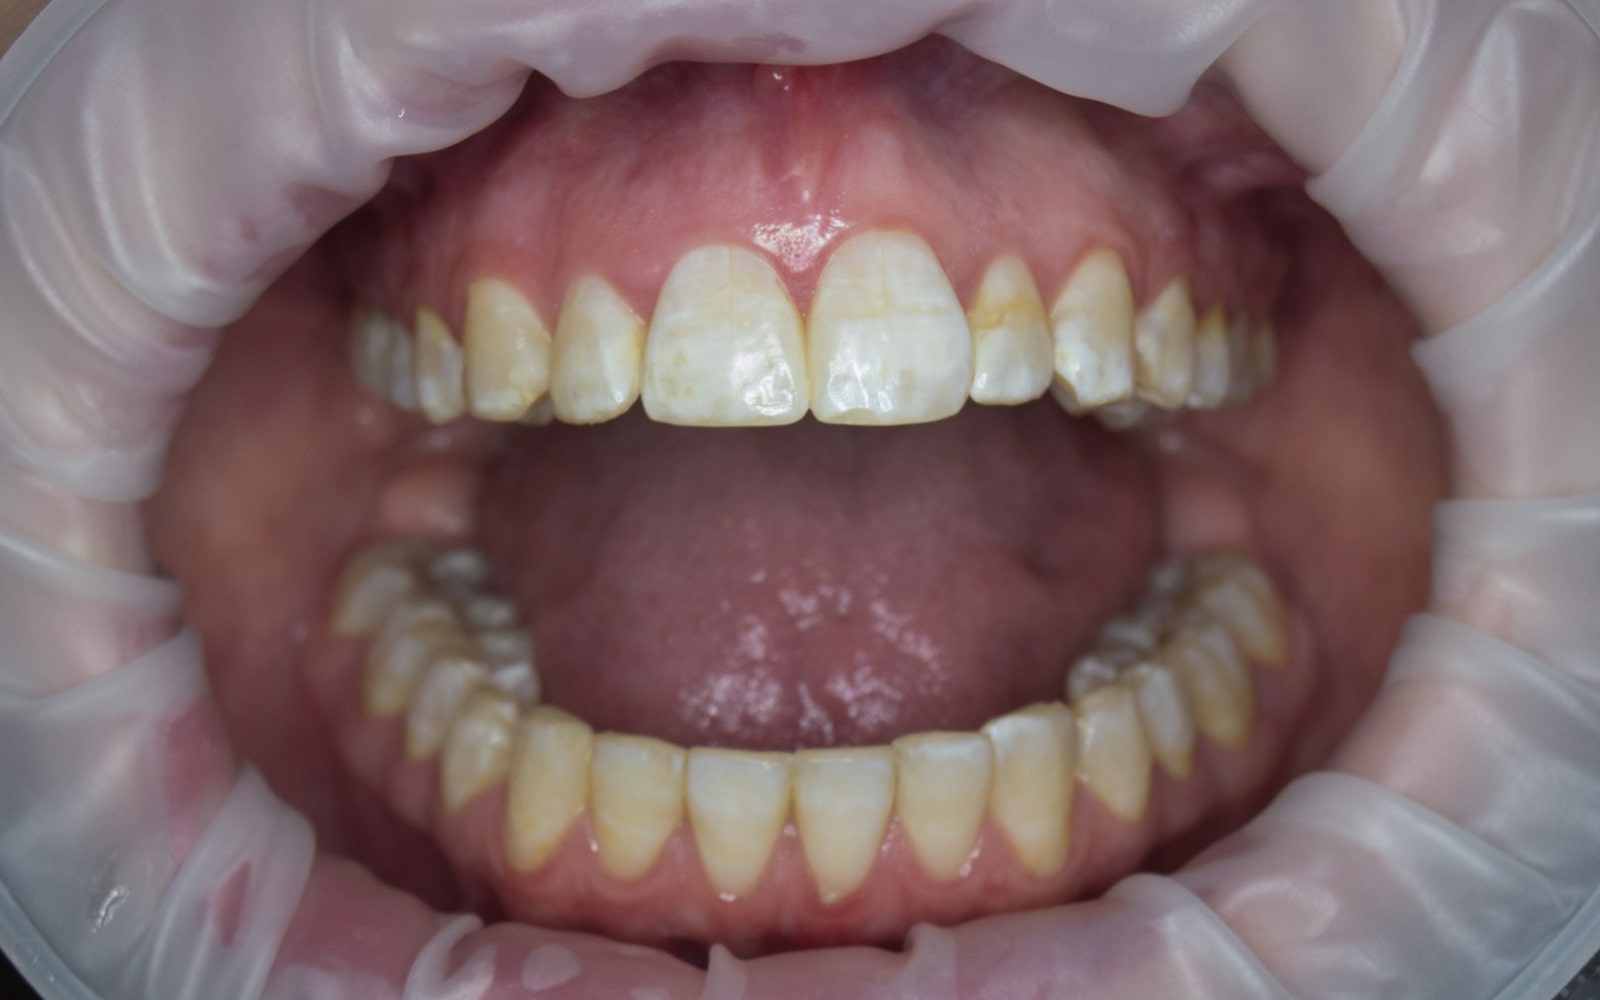 Teeth affected by fluorosis